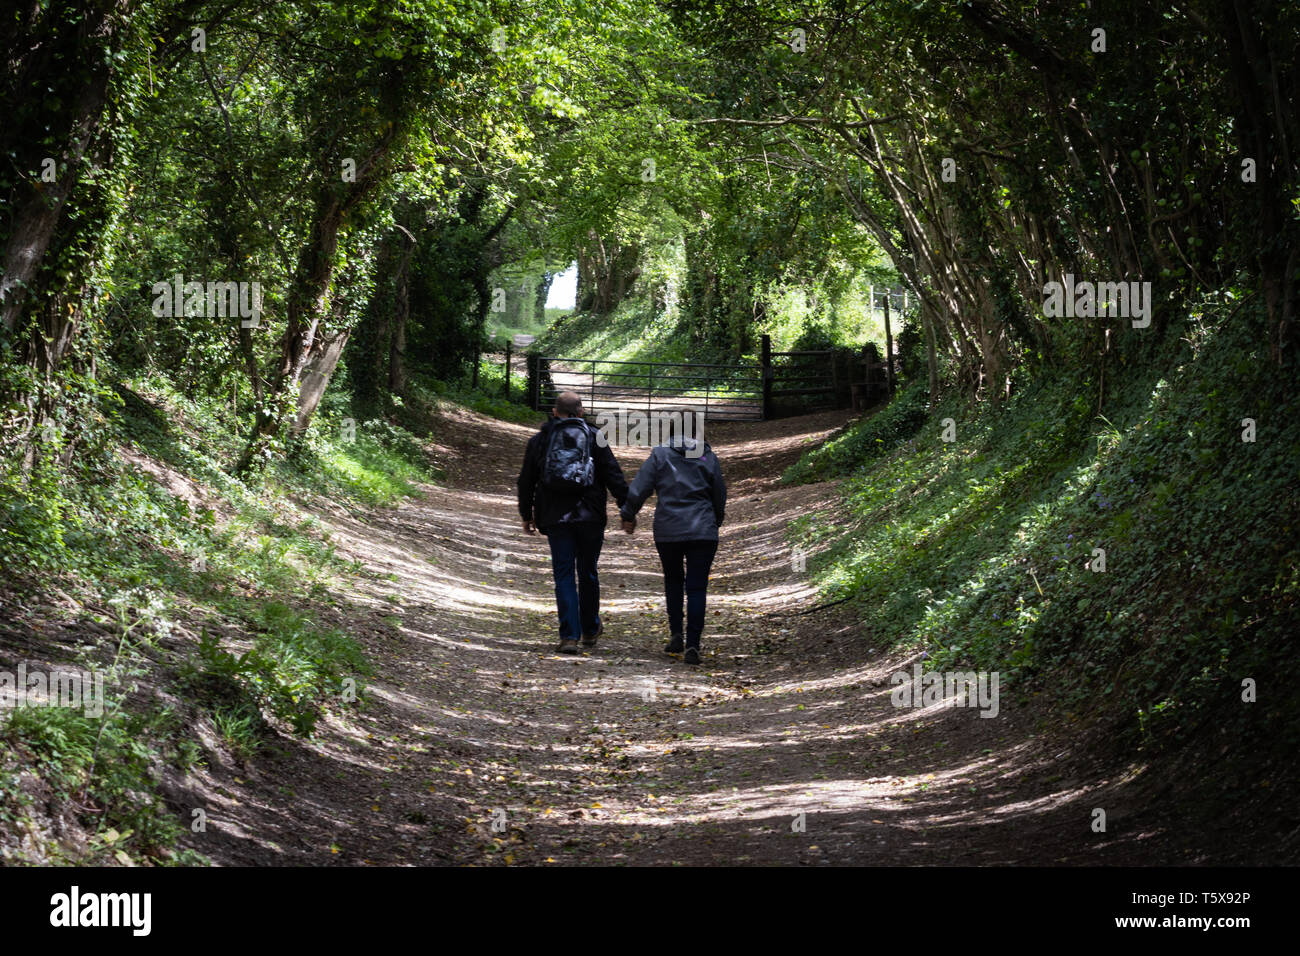 Middle aged couple walking through an archway of trees holding hands Stock Photo